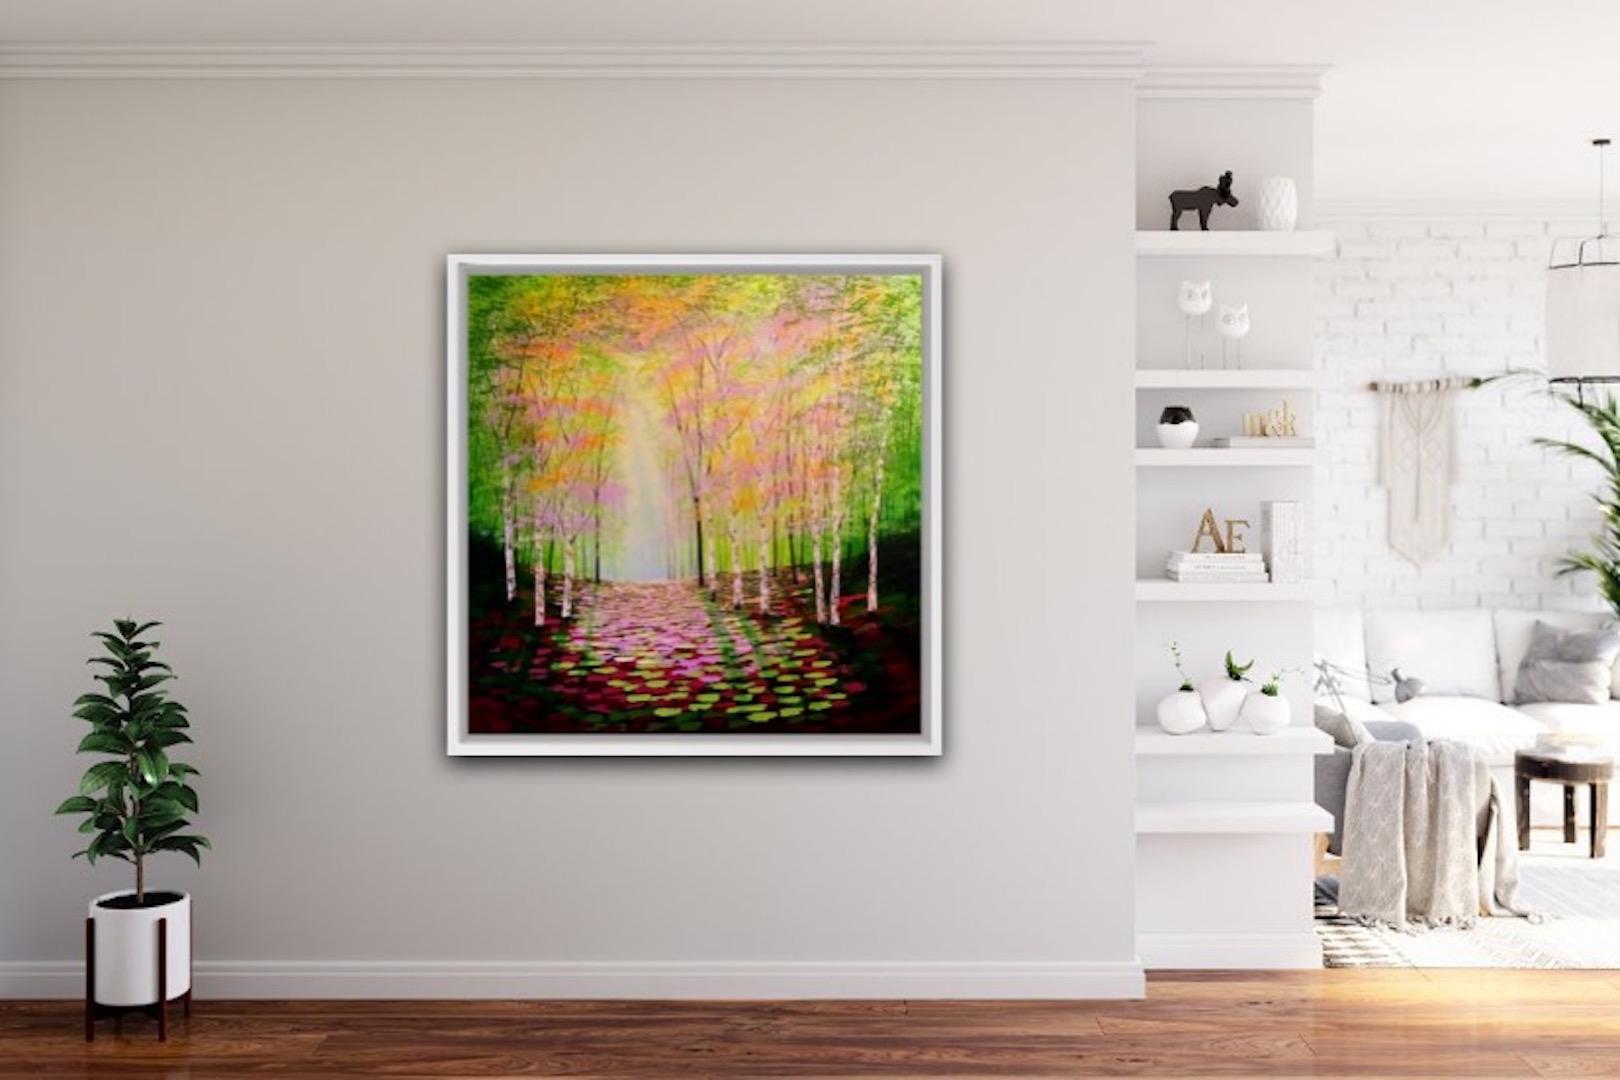 Amanda Horvath
Rose and Golden Wood
Original Acrylic Painting on Canvas
Acrylics on canvas
Image size: 102cm x 102cm x 3.5cm
Sold Unframed

(Please note that in situ images are purely an indication of how a piece may look).

“Rose and Golden Wood”